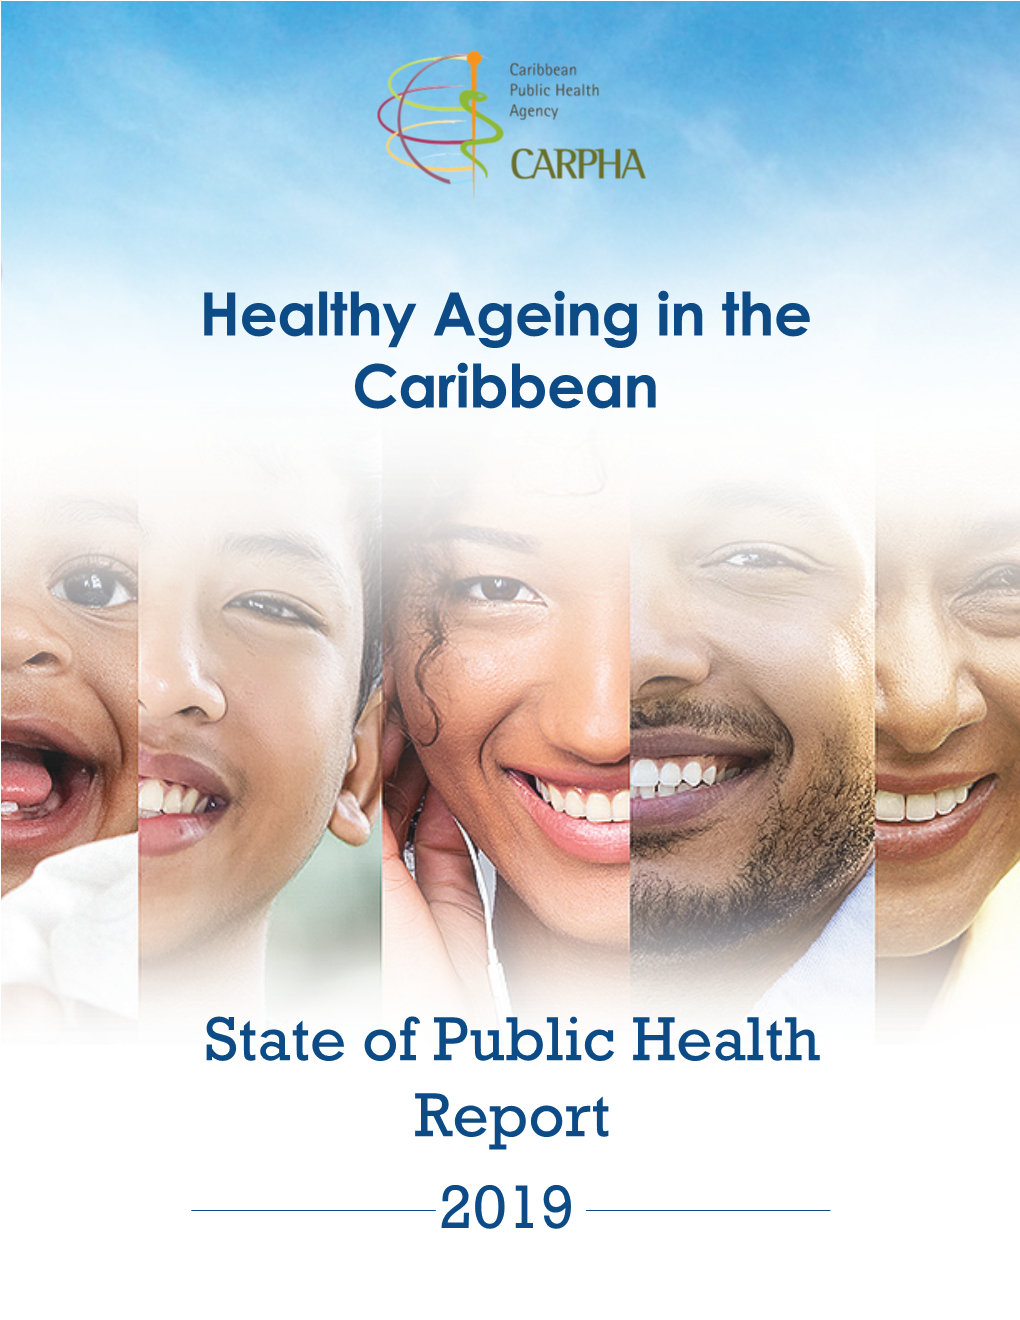 State of Public Health Report